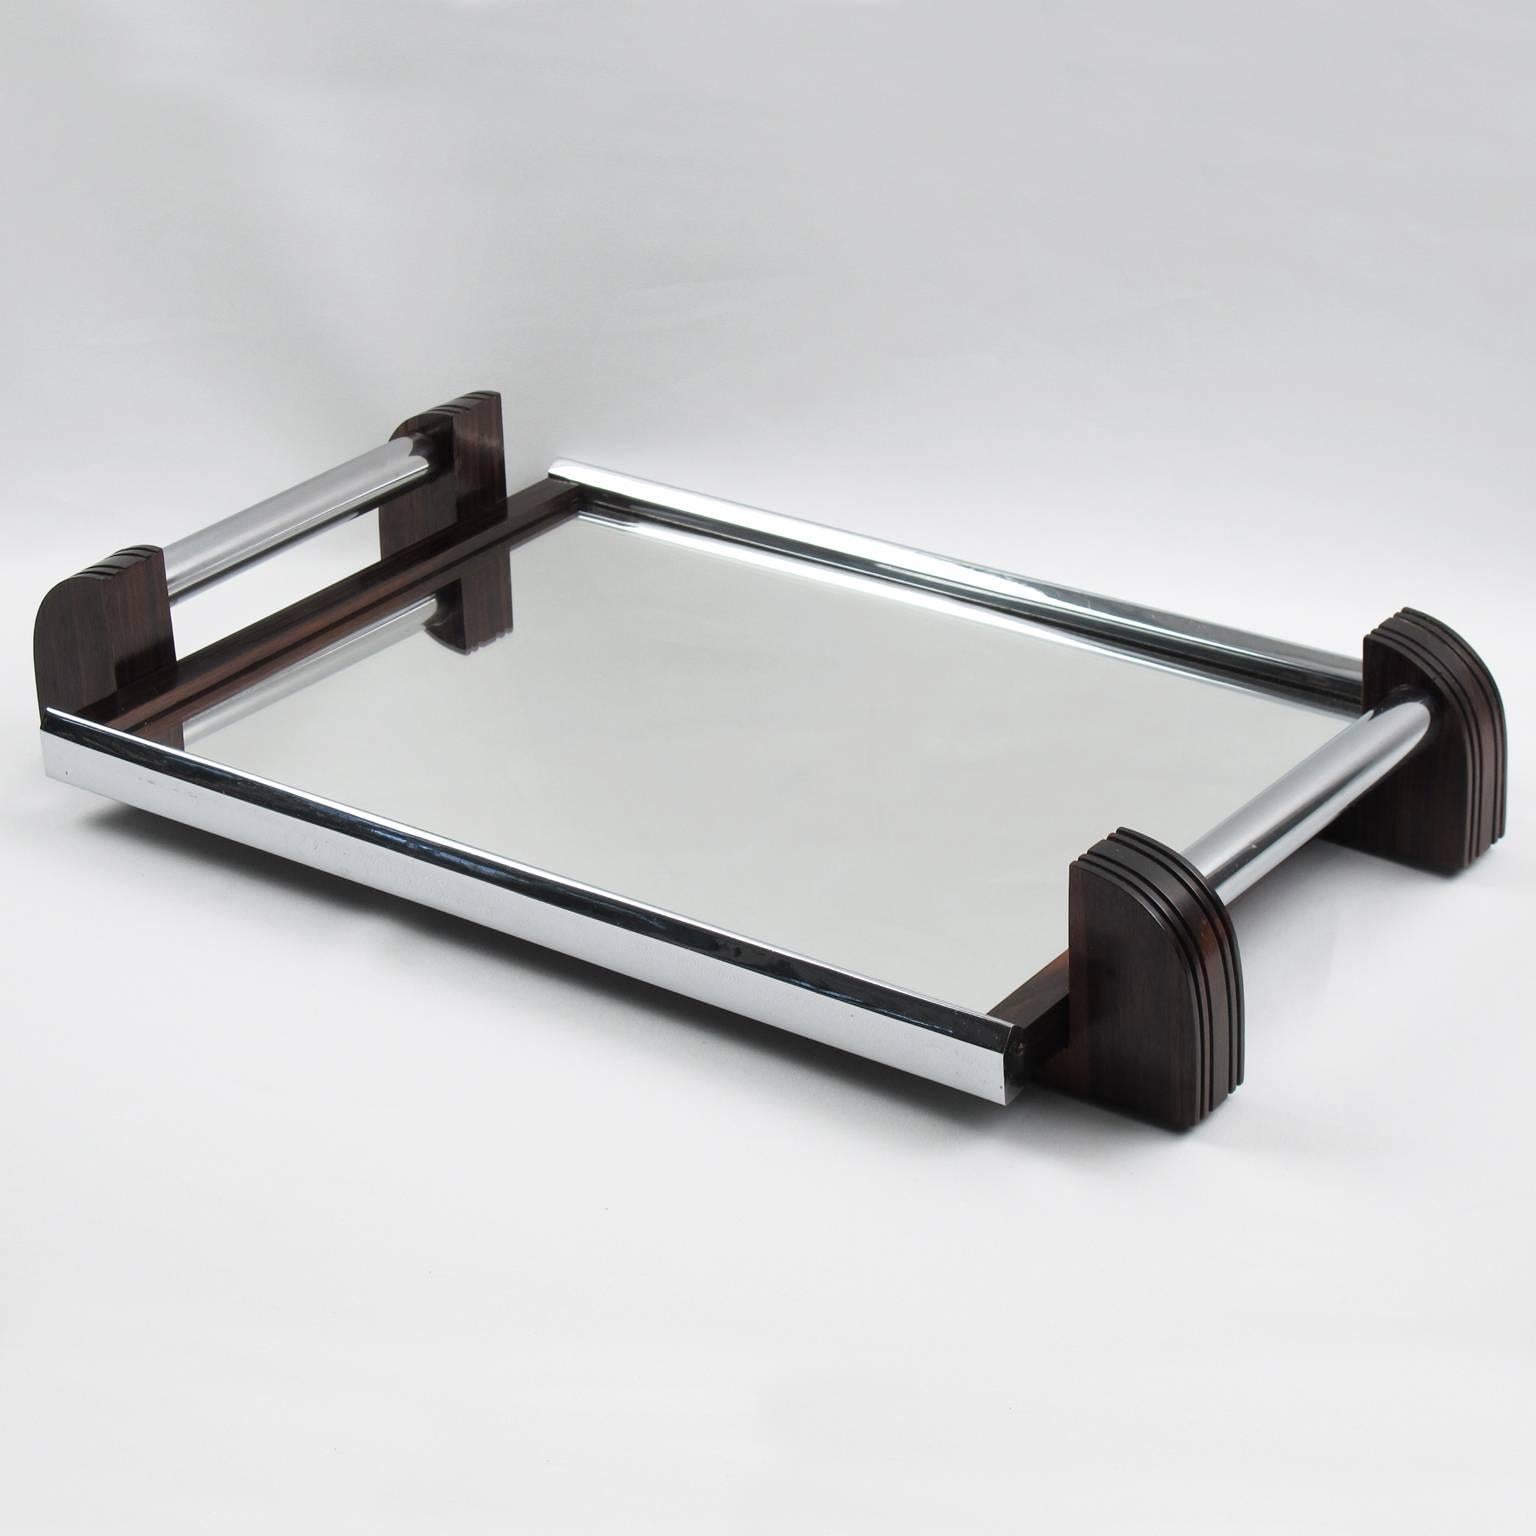 Elegant rectangular French Art Deco serving tray. Chromed metal gallery with tall solid Macassar wood carved handles. Insert base in mirror. Modernist design and geometric streamline shape offers all the elegance one could imagine for the finest